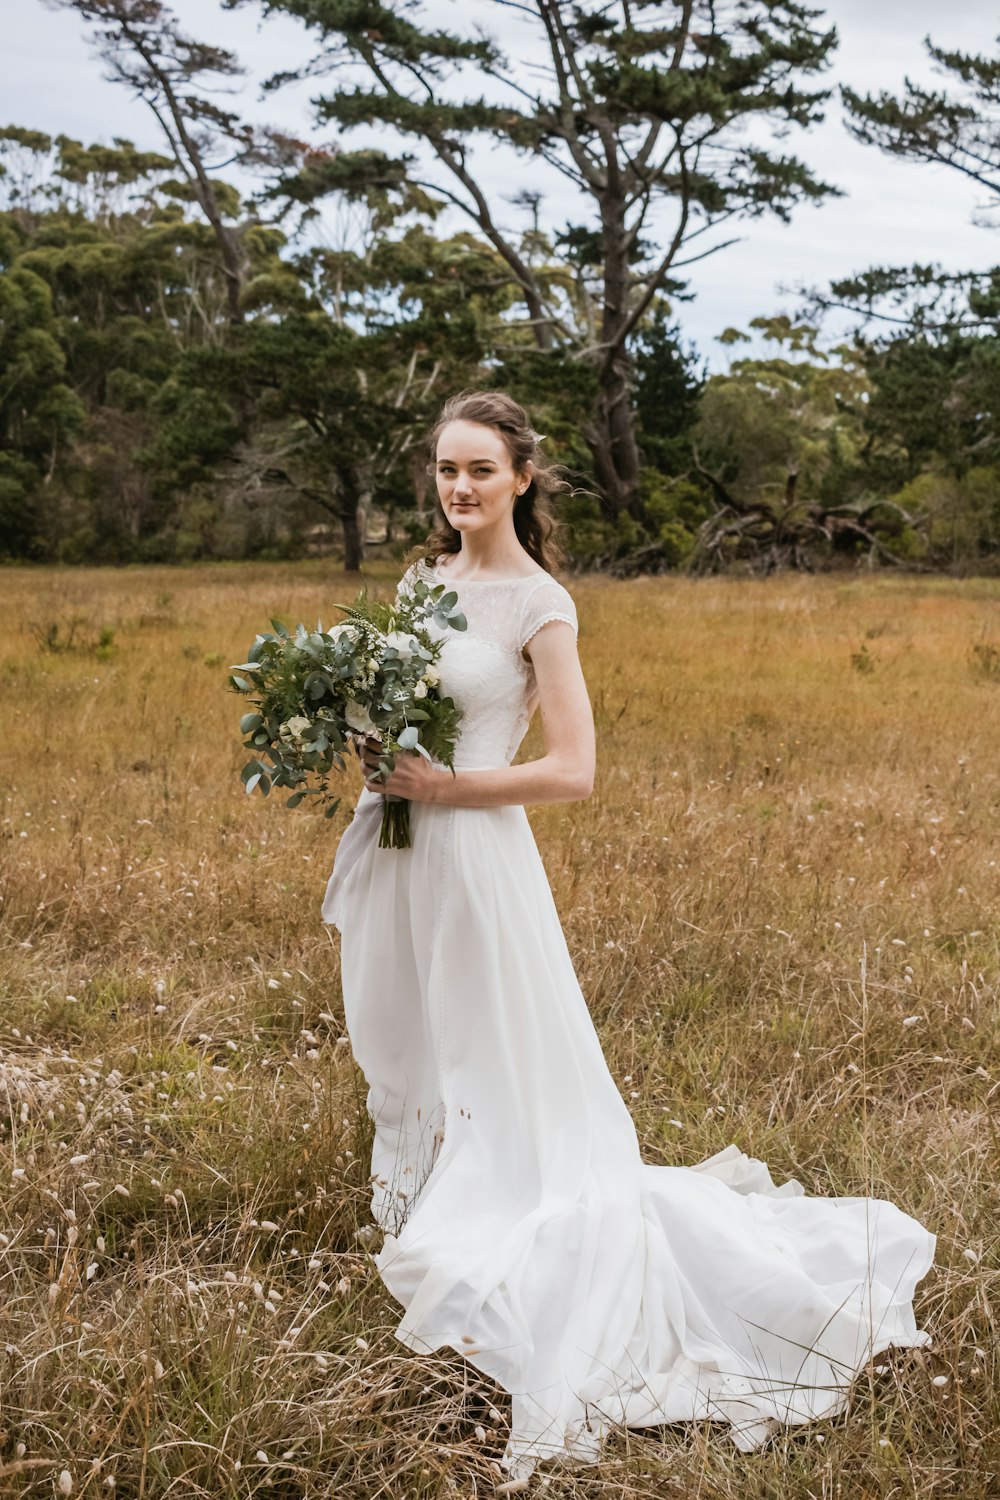 woman wearing white wedding dress standing on pasture while holding bouquet during daytime